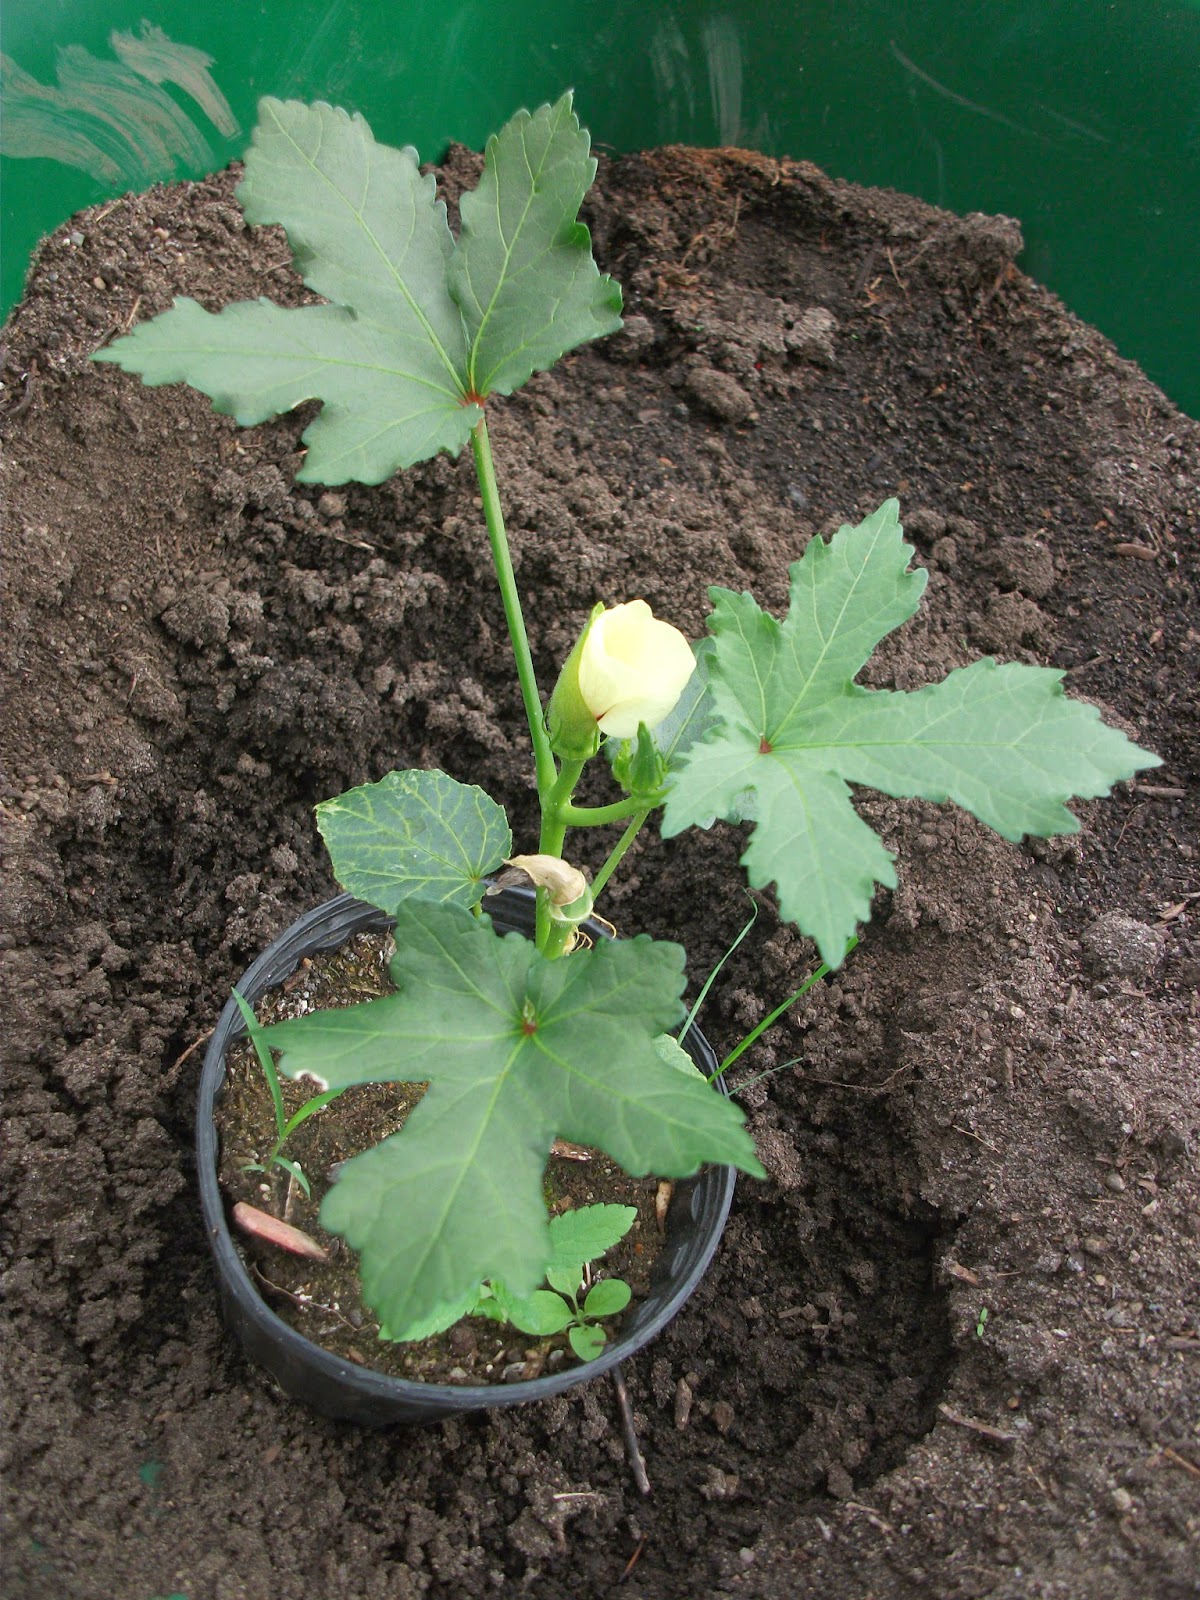 Cold Hands Warm Earth: Okra Seeds - only 2 days to germinate!